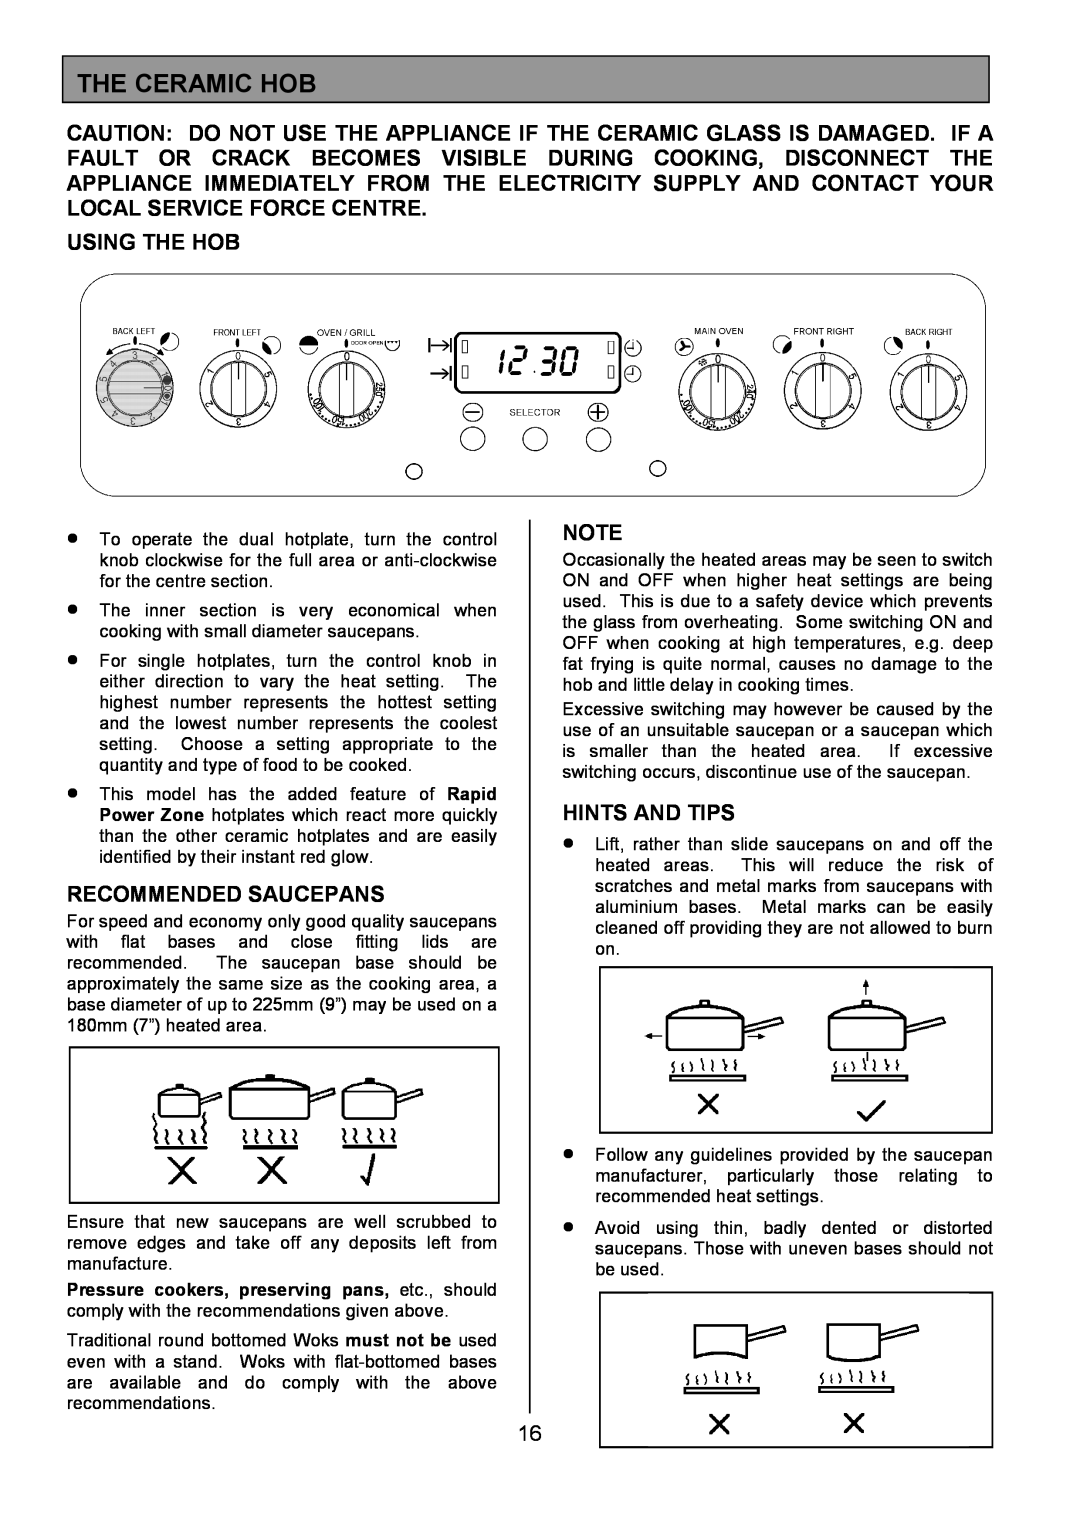 Tricity Bendix SIE555 installation instructions The Ceramic Hob, Using The Hob, Recommended Saucepans, Hints And Tips 